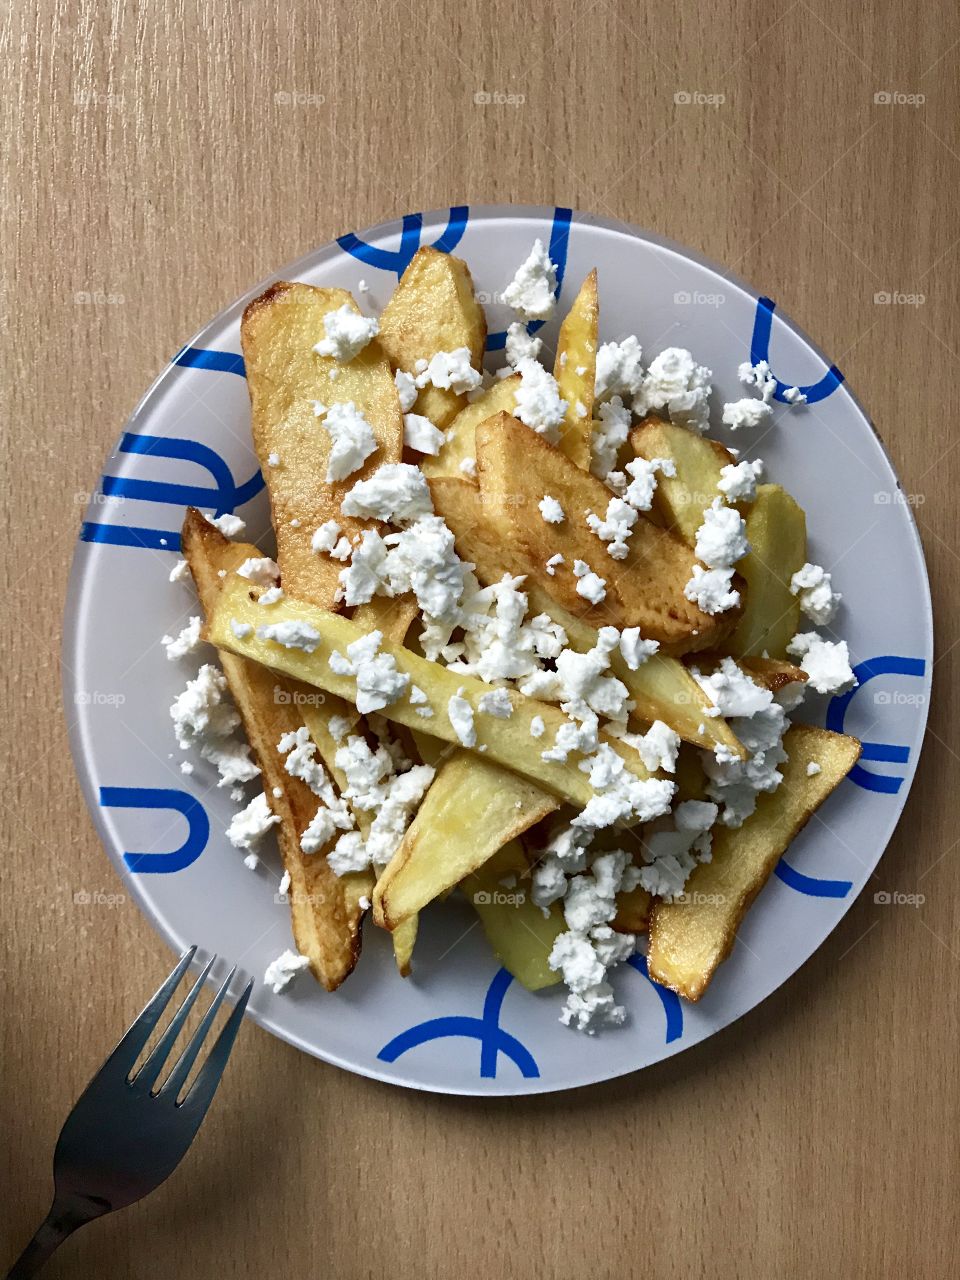 It’s my lunch of 100 grams of fried potatoes with cheese - 350 calories.